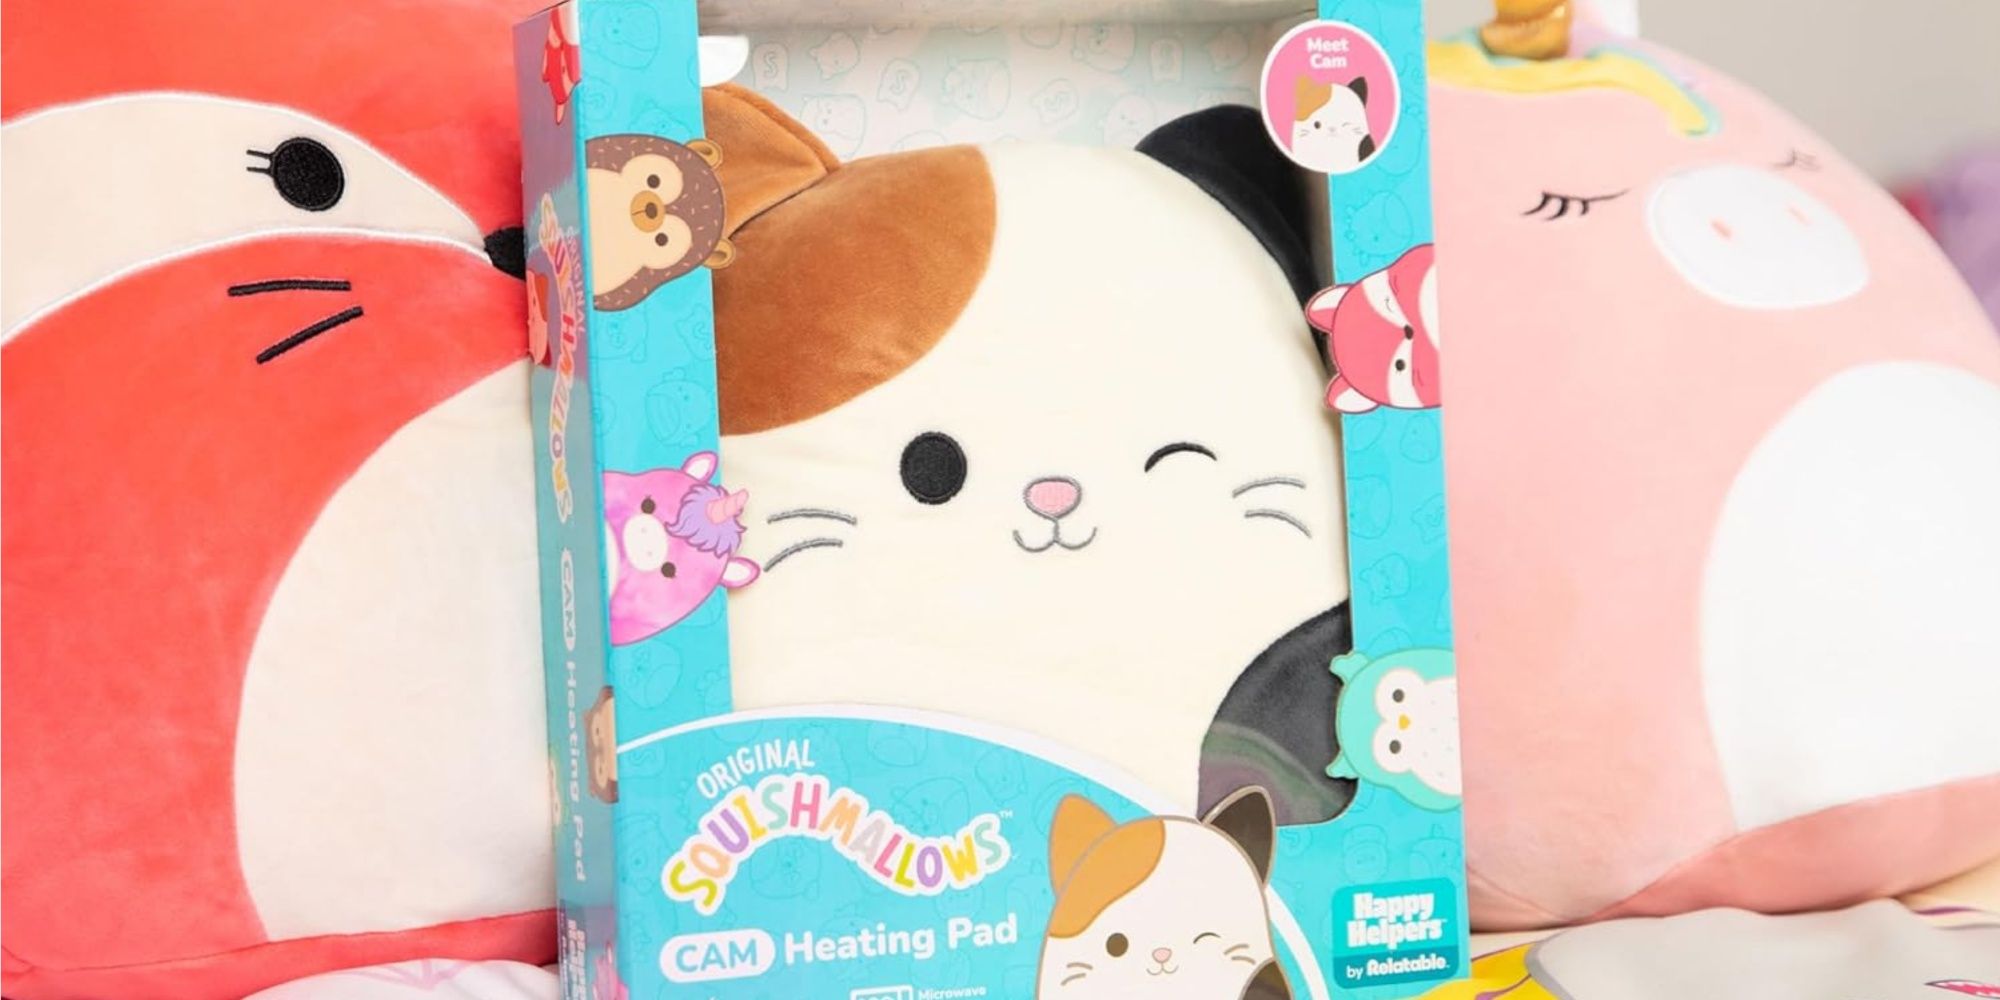 Squishmallows heating pad box next to other Squishmallows